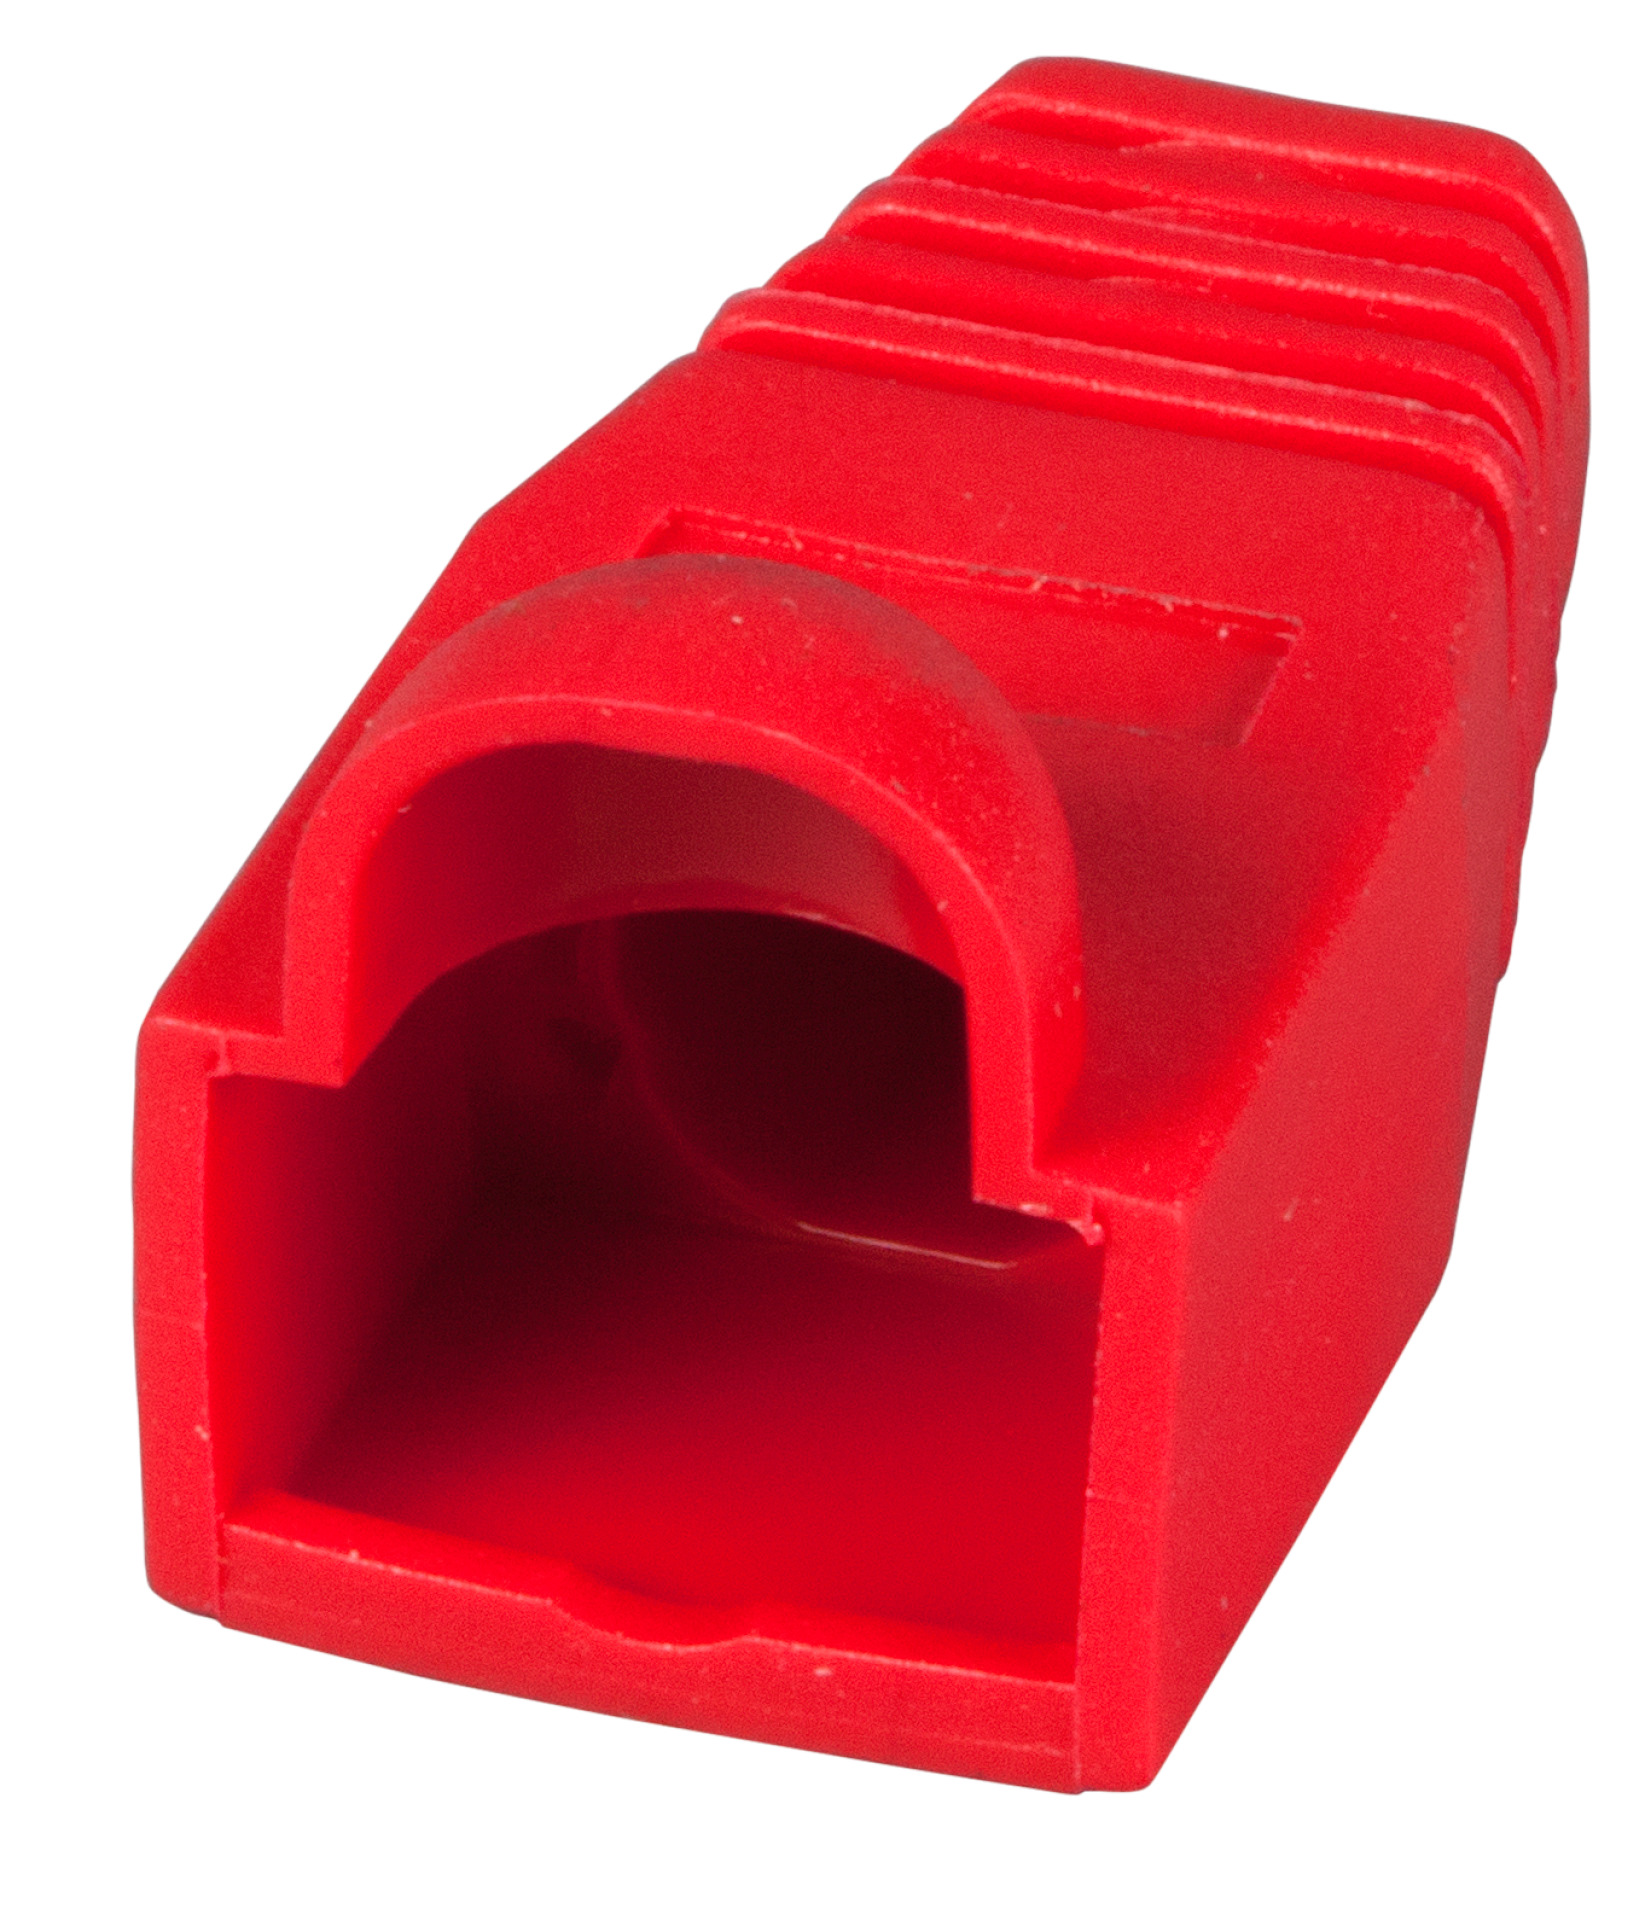 Anti-Kink sleeve RJ45 red, with Latch Protection, 100 Pcs.